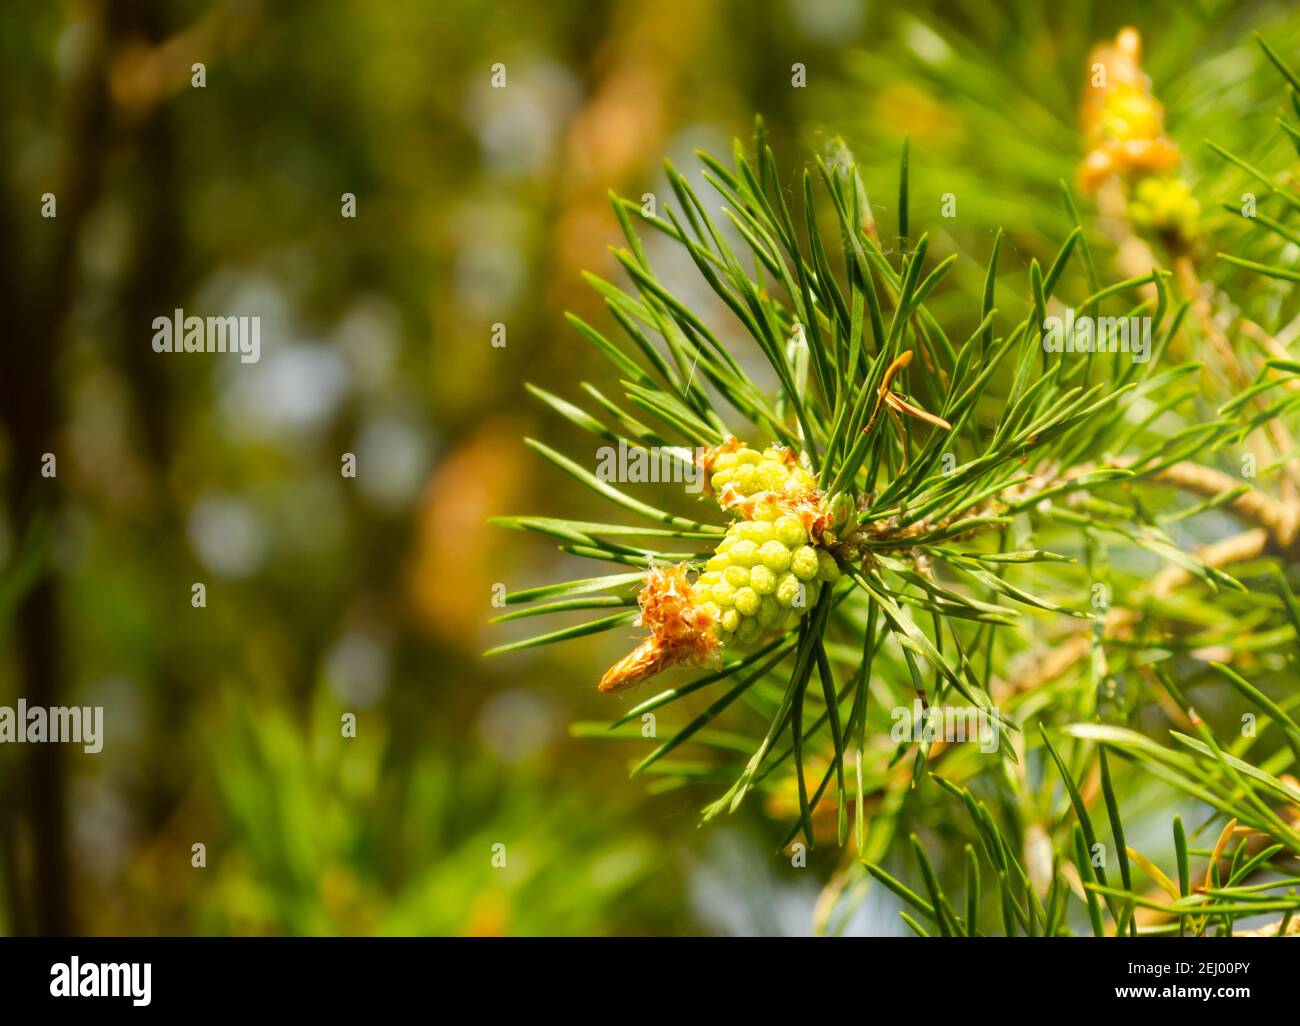 A green natural background with close-up view of a branch of pine flowering at the forest on sunny day. Young pine buds. Flowering Branches of Scots p Stock Photo